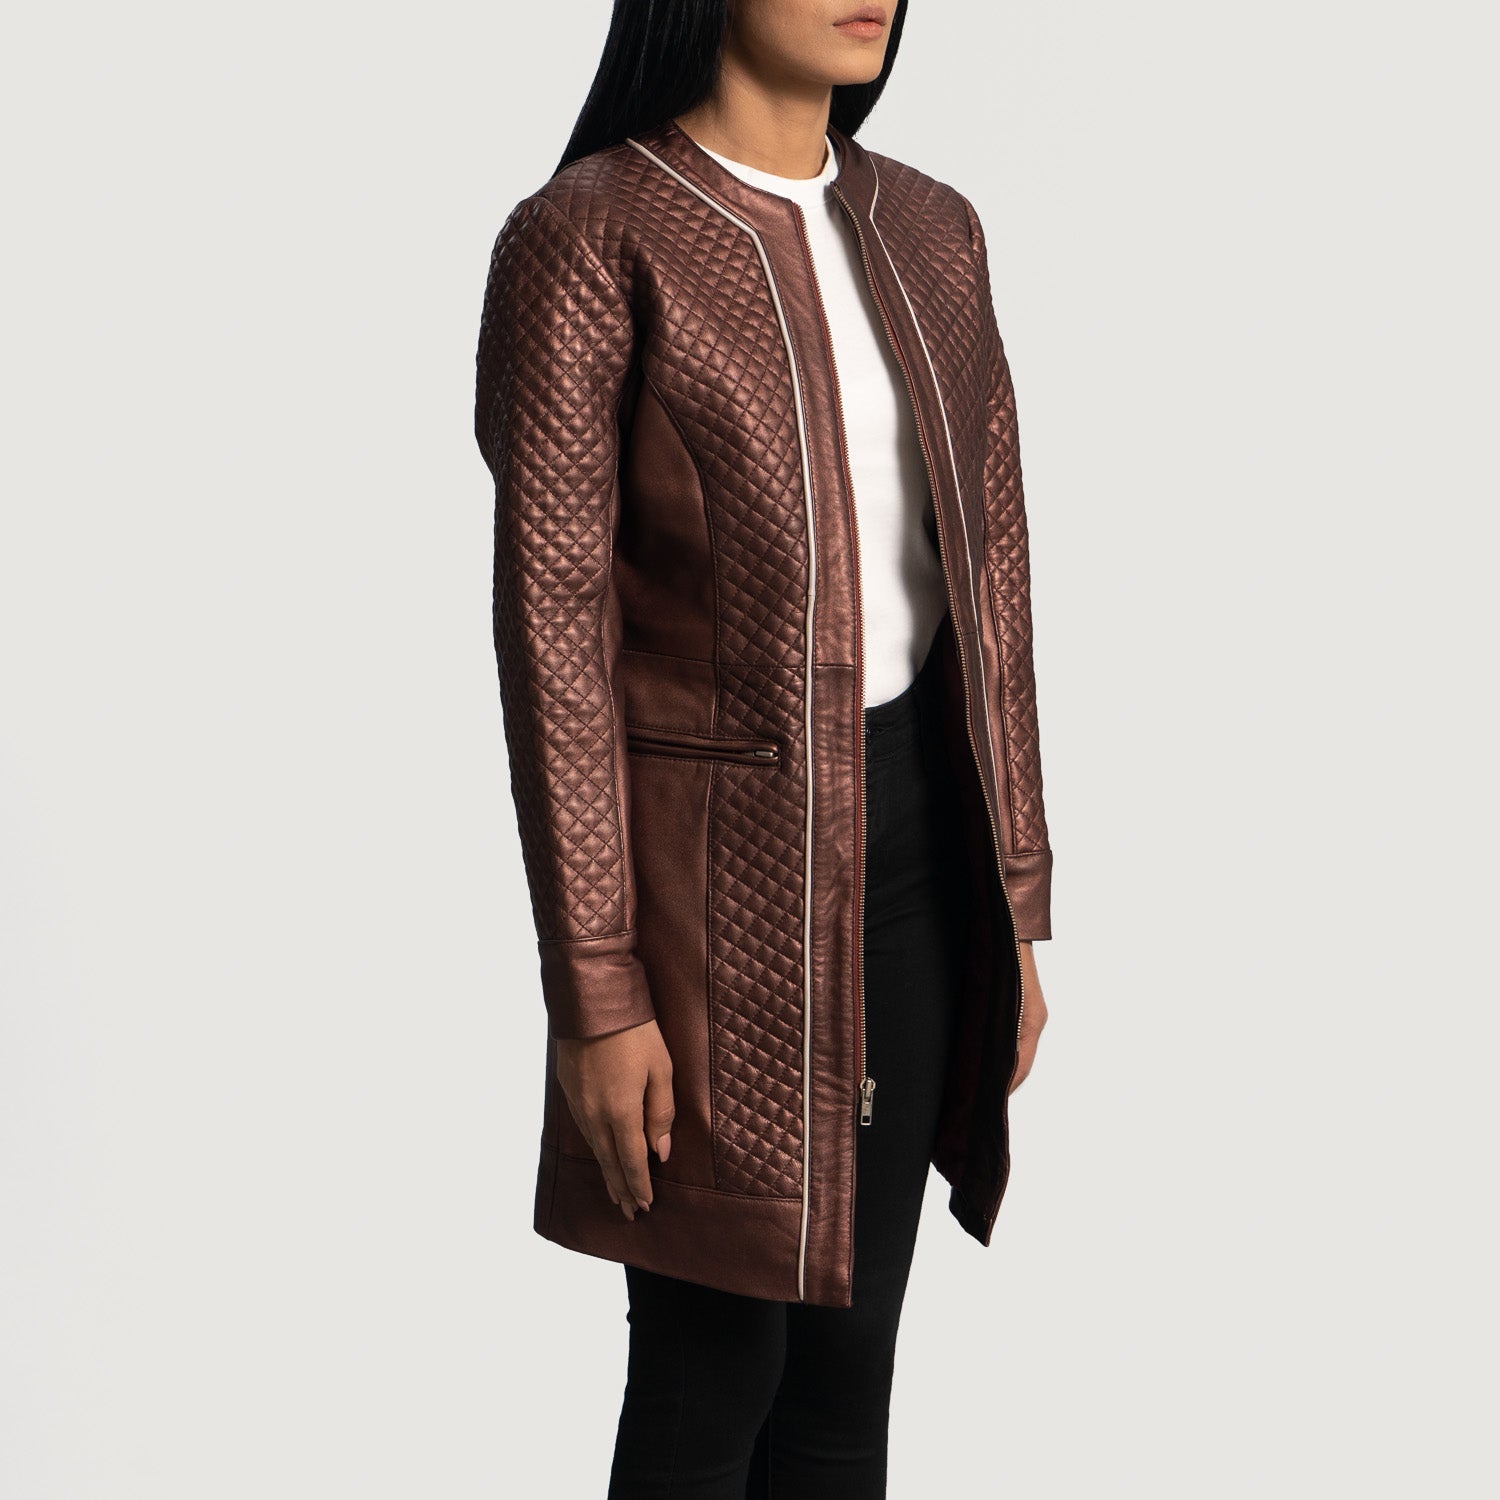 Trudy Lane Quilted Maroon Leather Coat